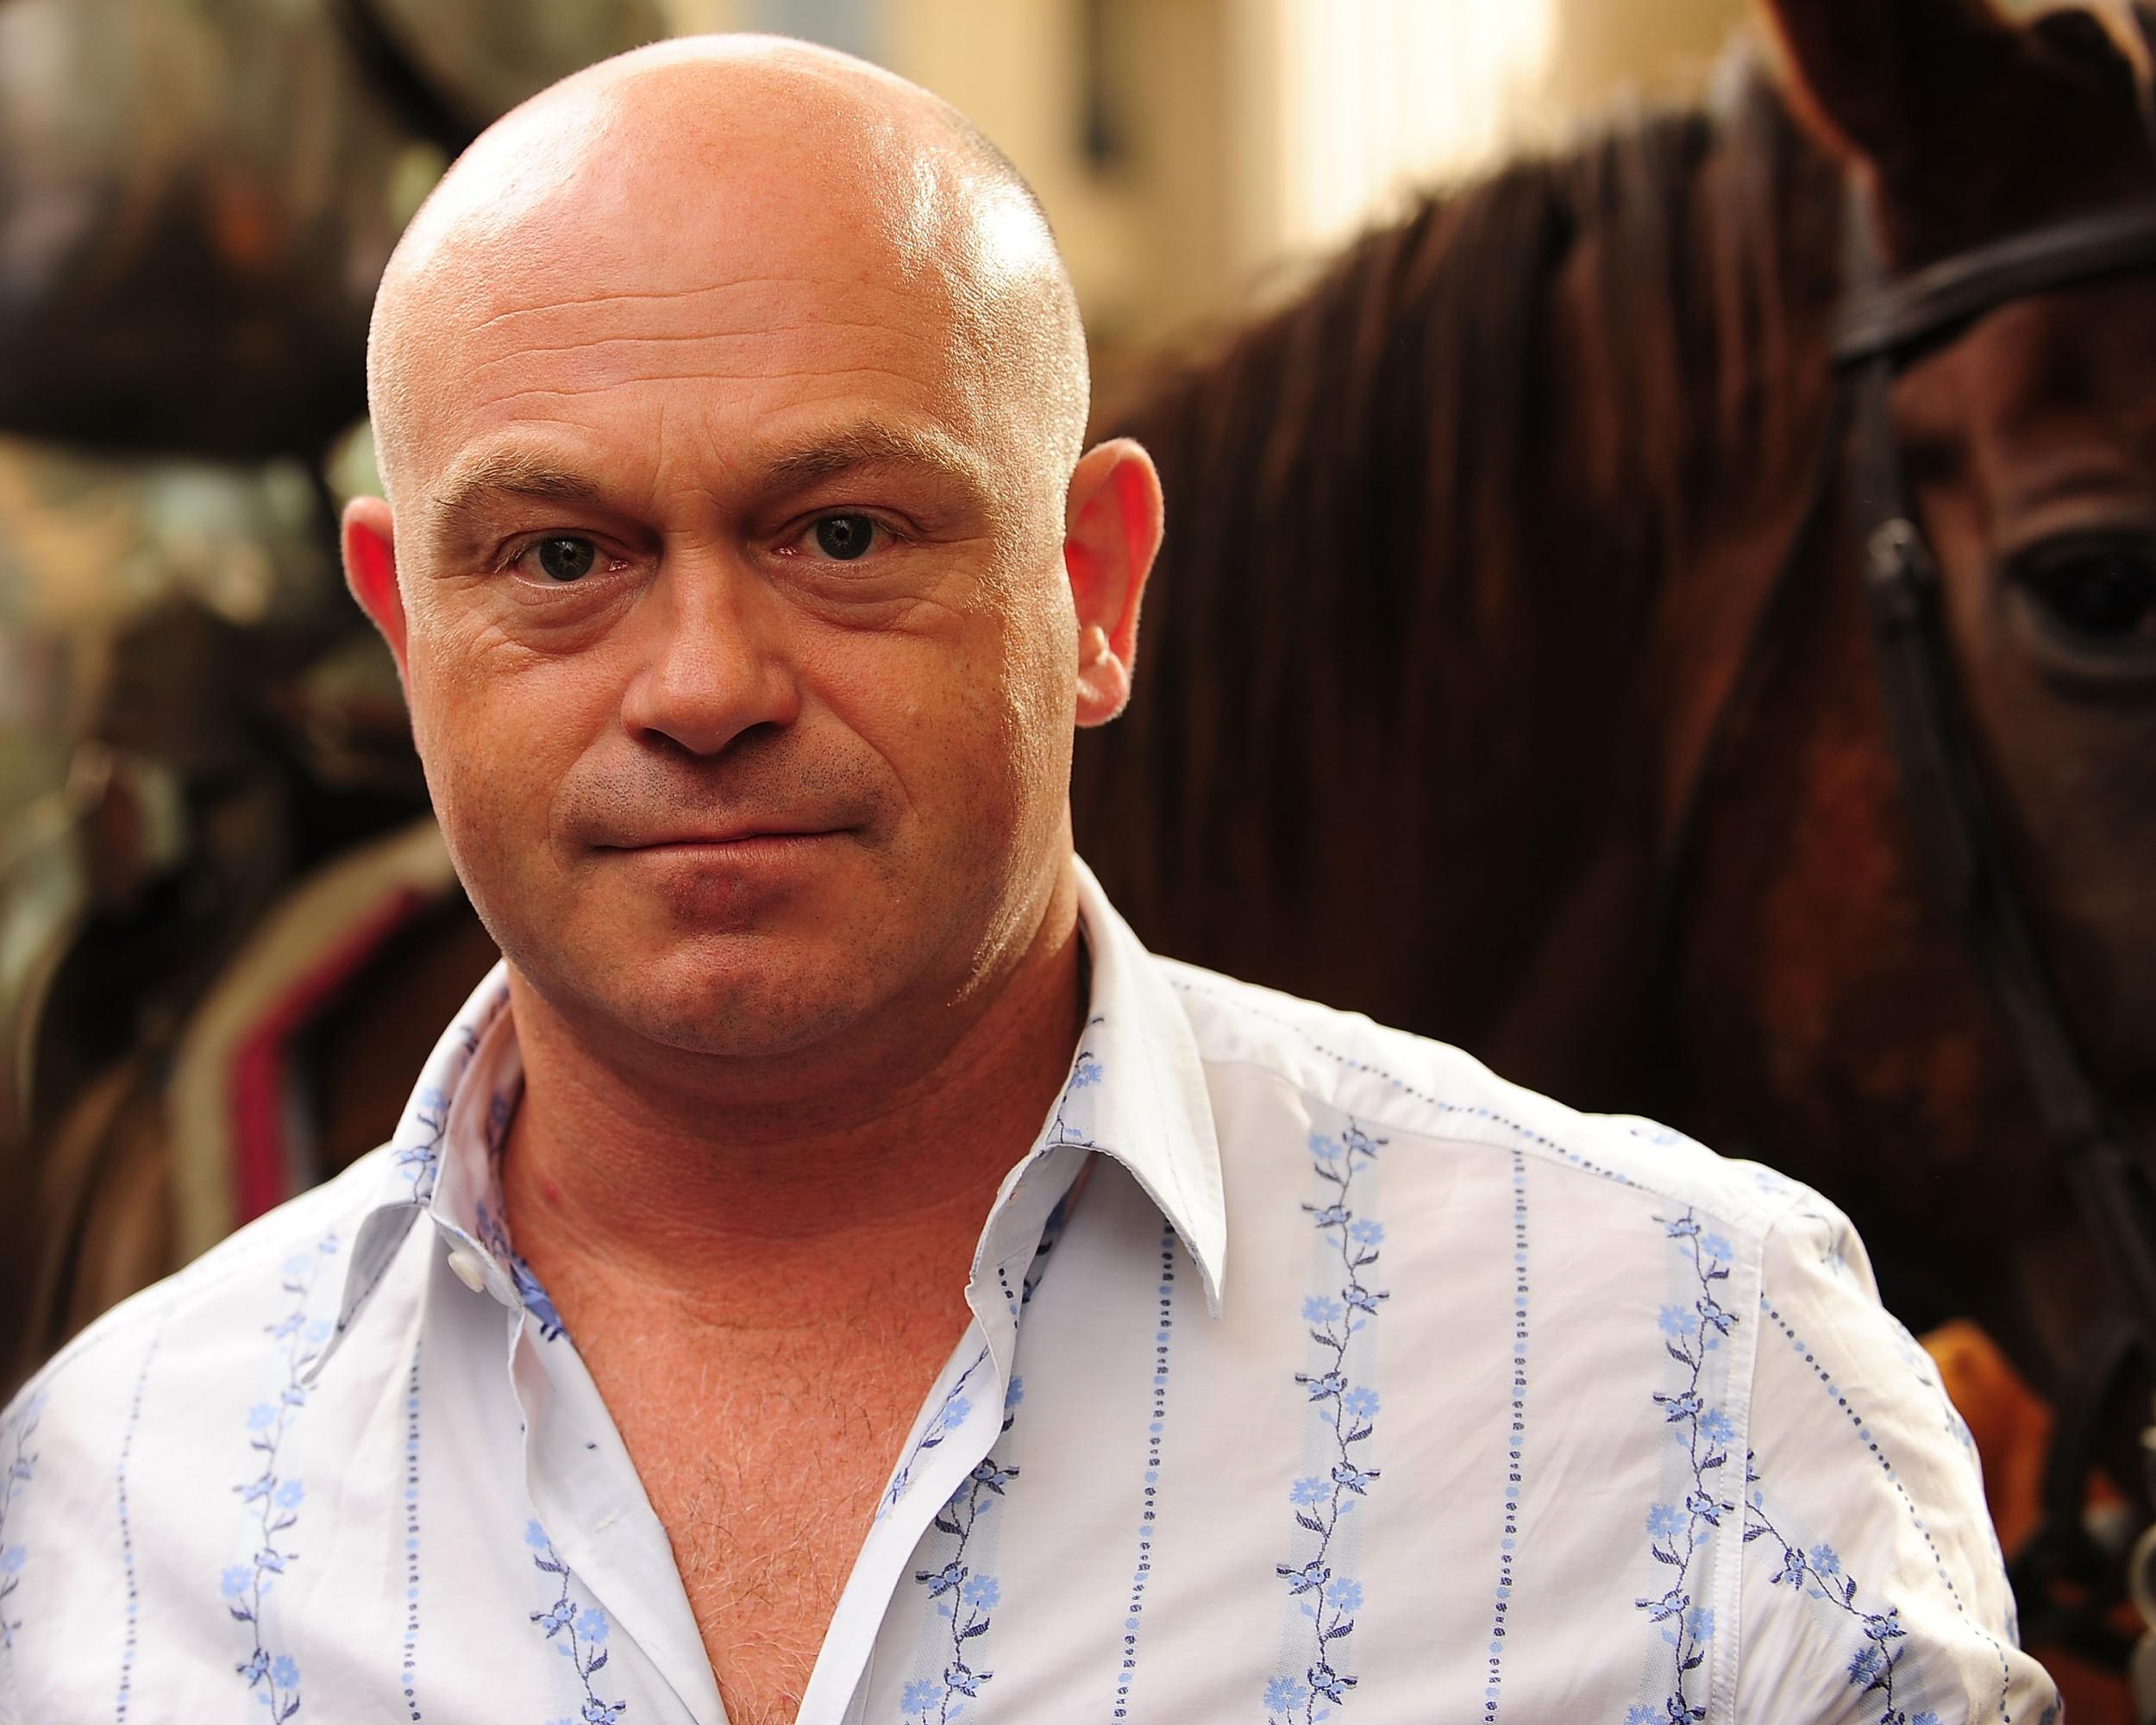 Former Eastenders actor Ross Kemp's visit is a 'contributory